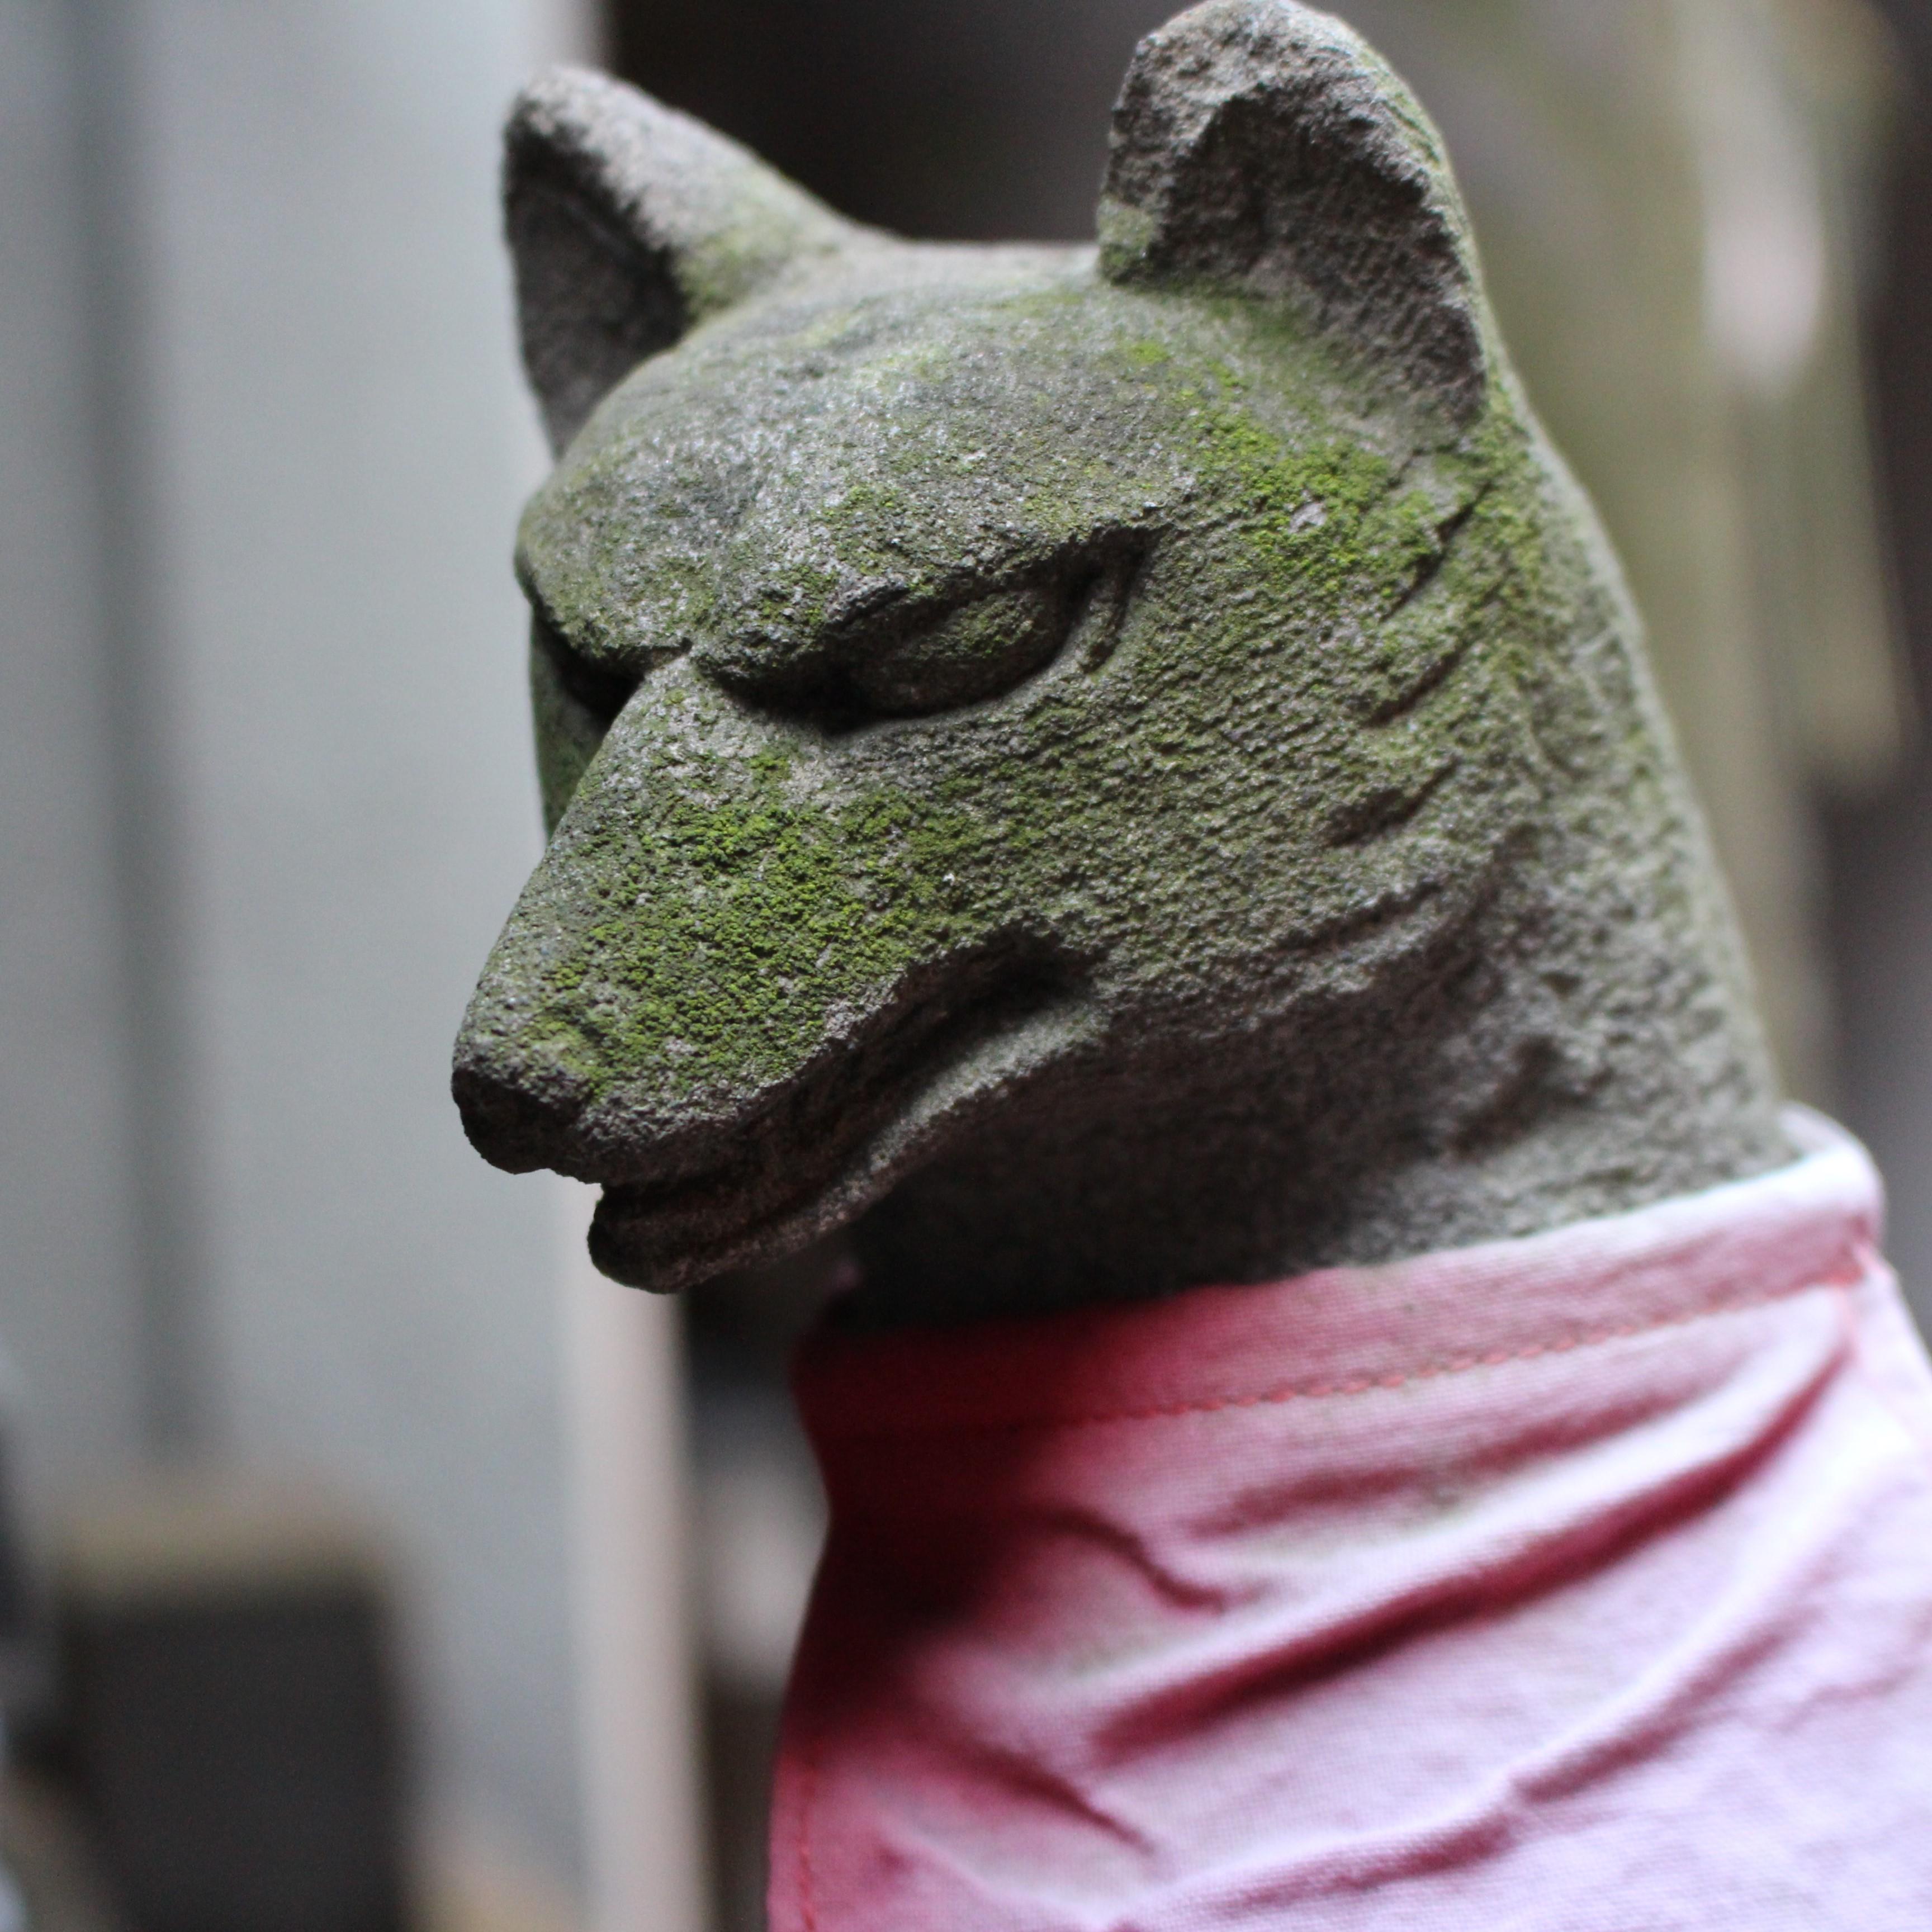 Why are there fox sculptures in Japanese shrines?